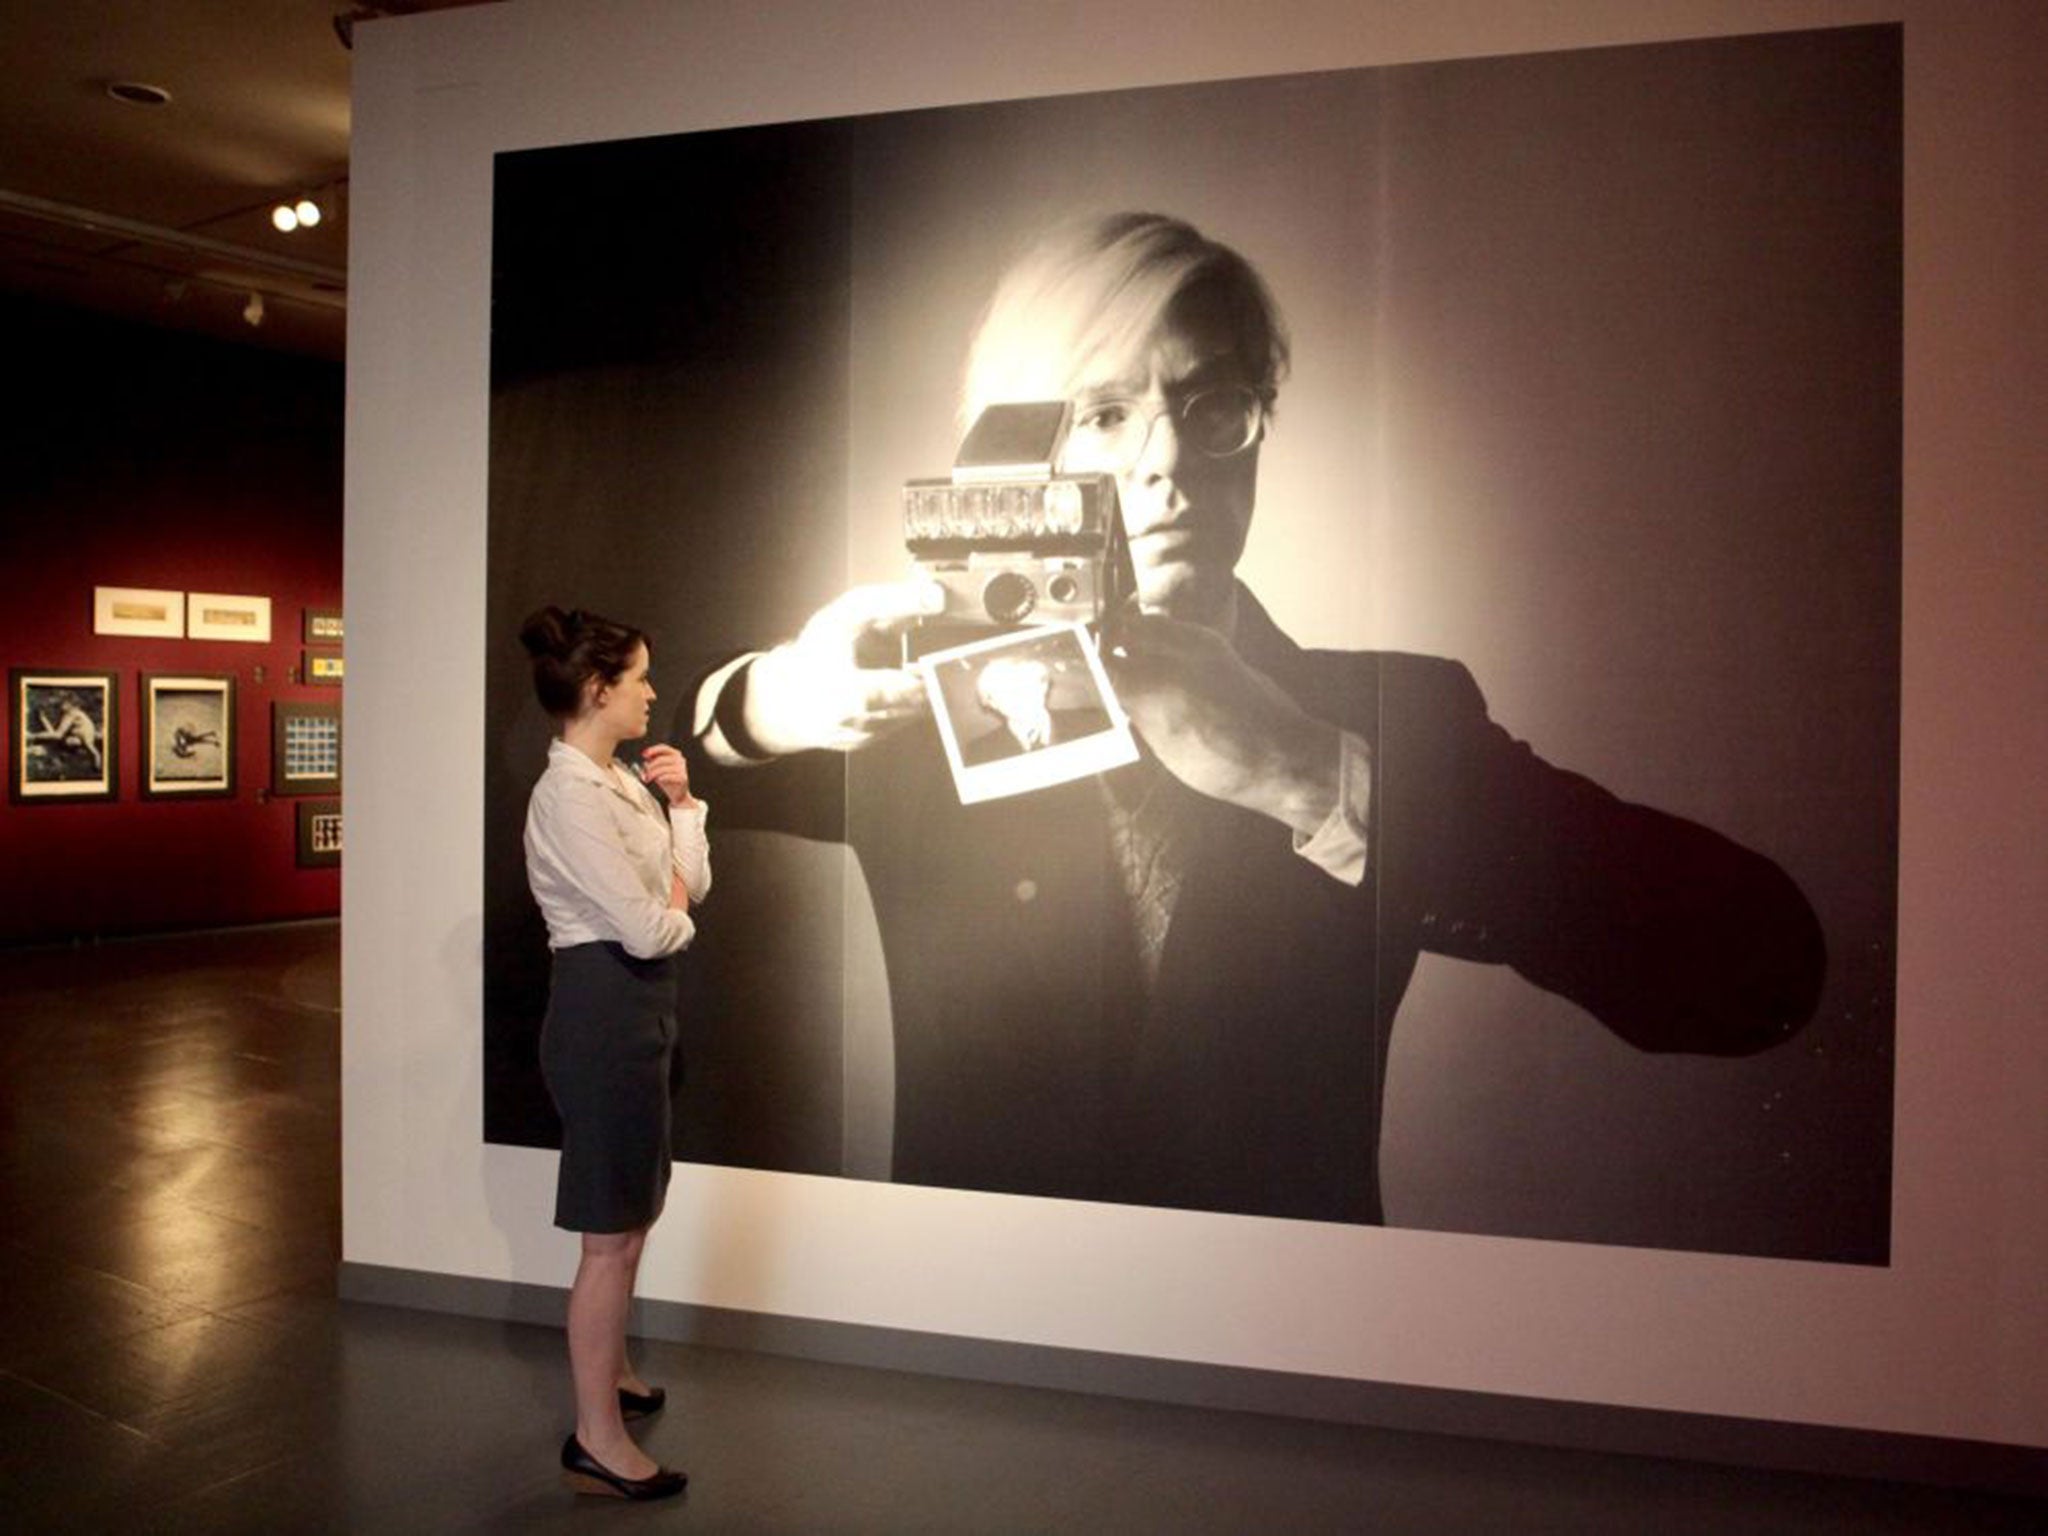 Instant appeal: A visitor examines a photo of Andy Warhol at a Polaroid exhibition in Germany